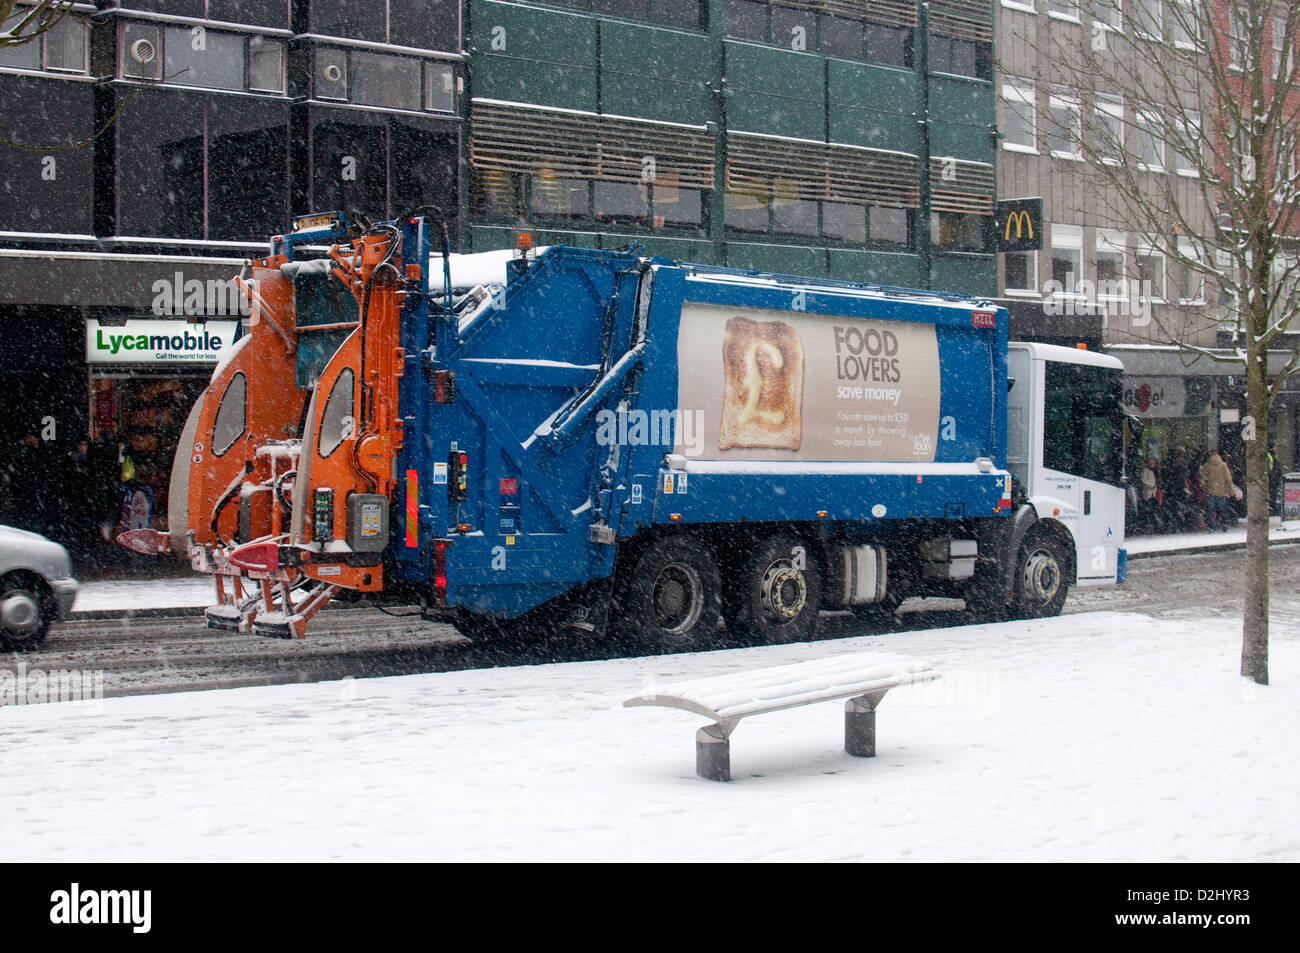 Refuse collection vehicle in snowy weather, Coventry city centre, UK Stock Photo